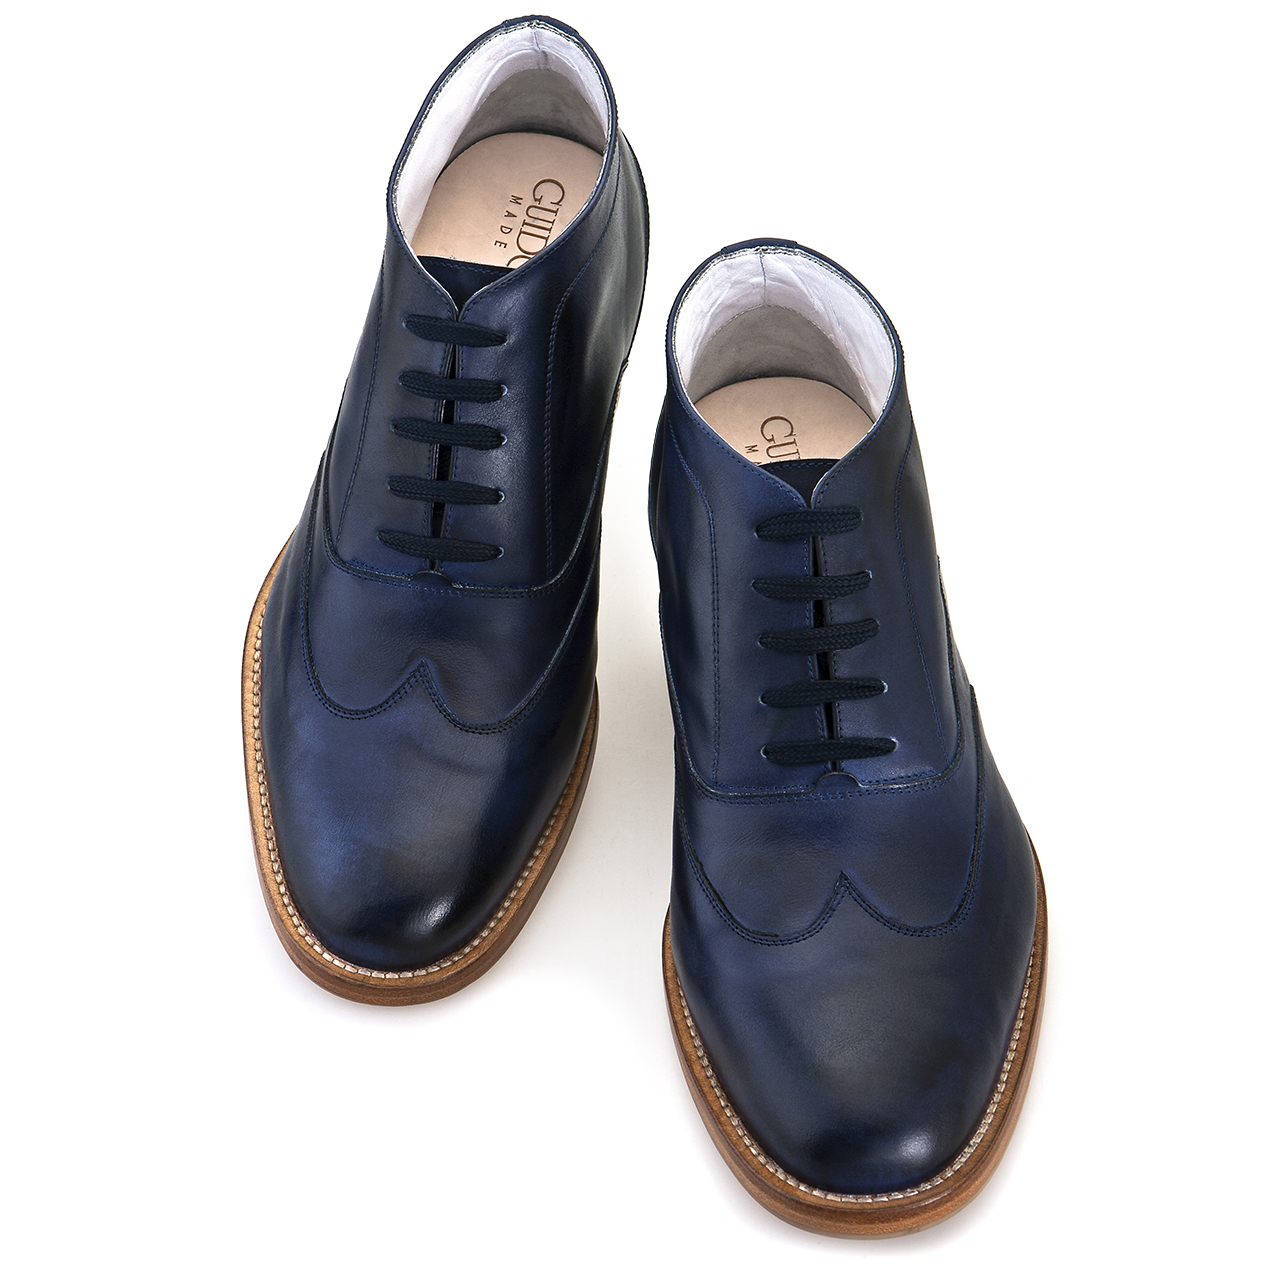 Memphis Tall men boots | Guidomaggi luxury elevator shoes